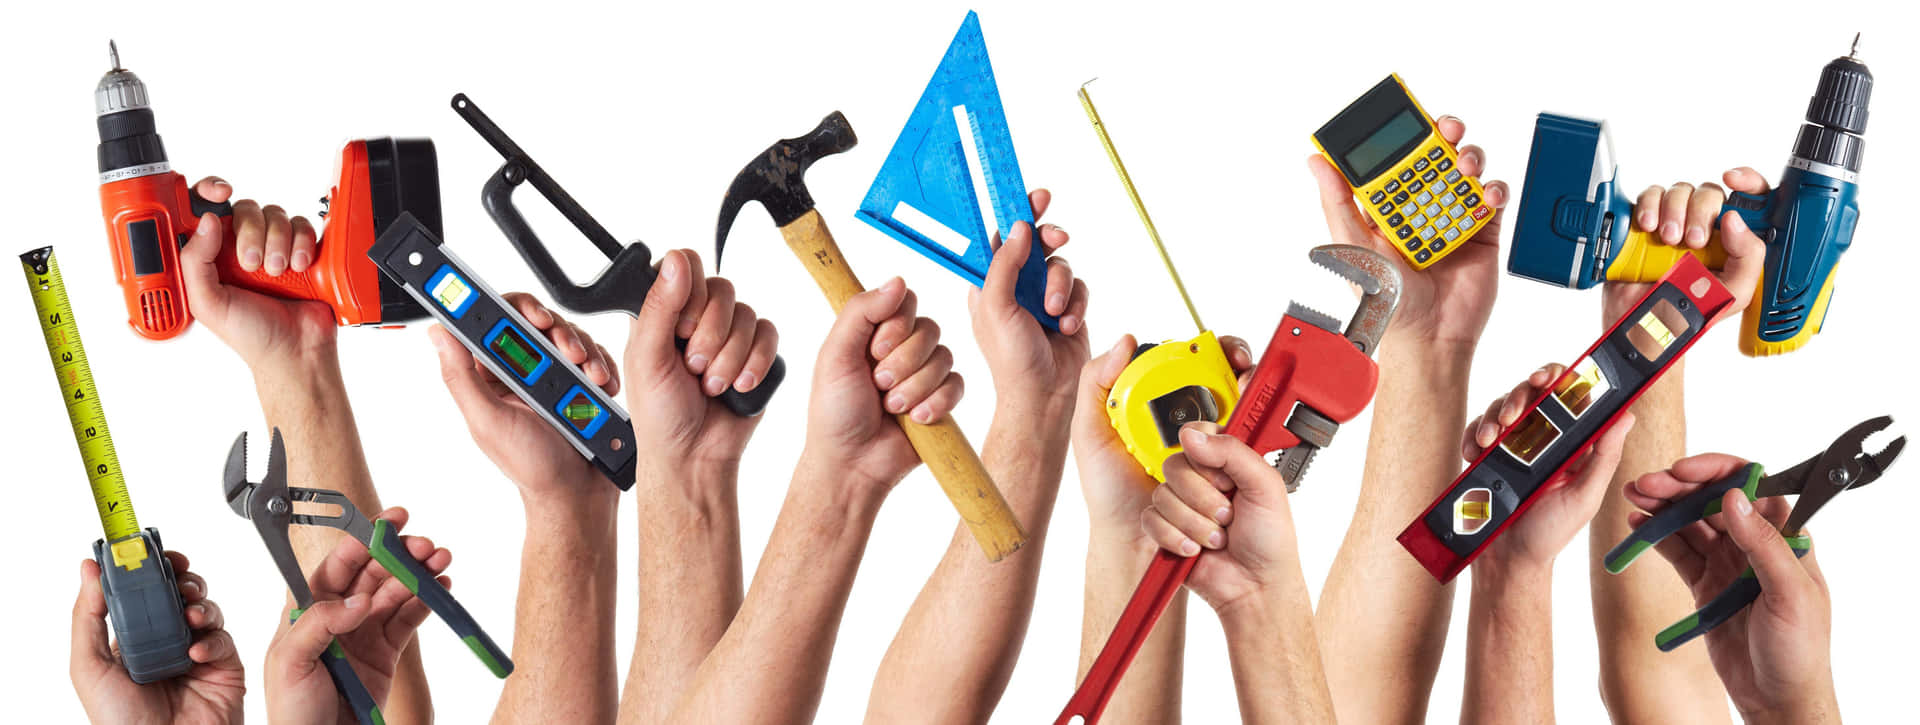 A Group Of Hands Holding Different Tools